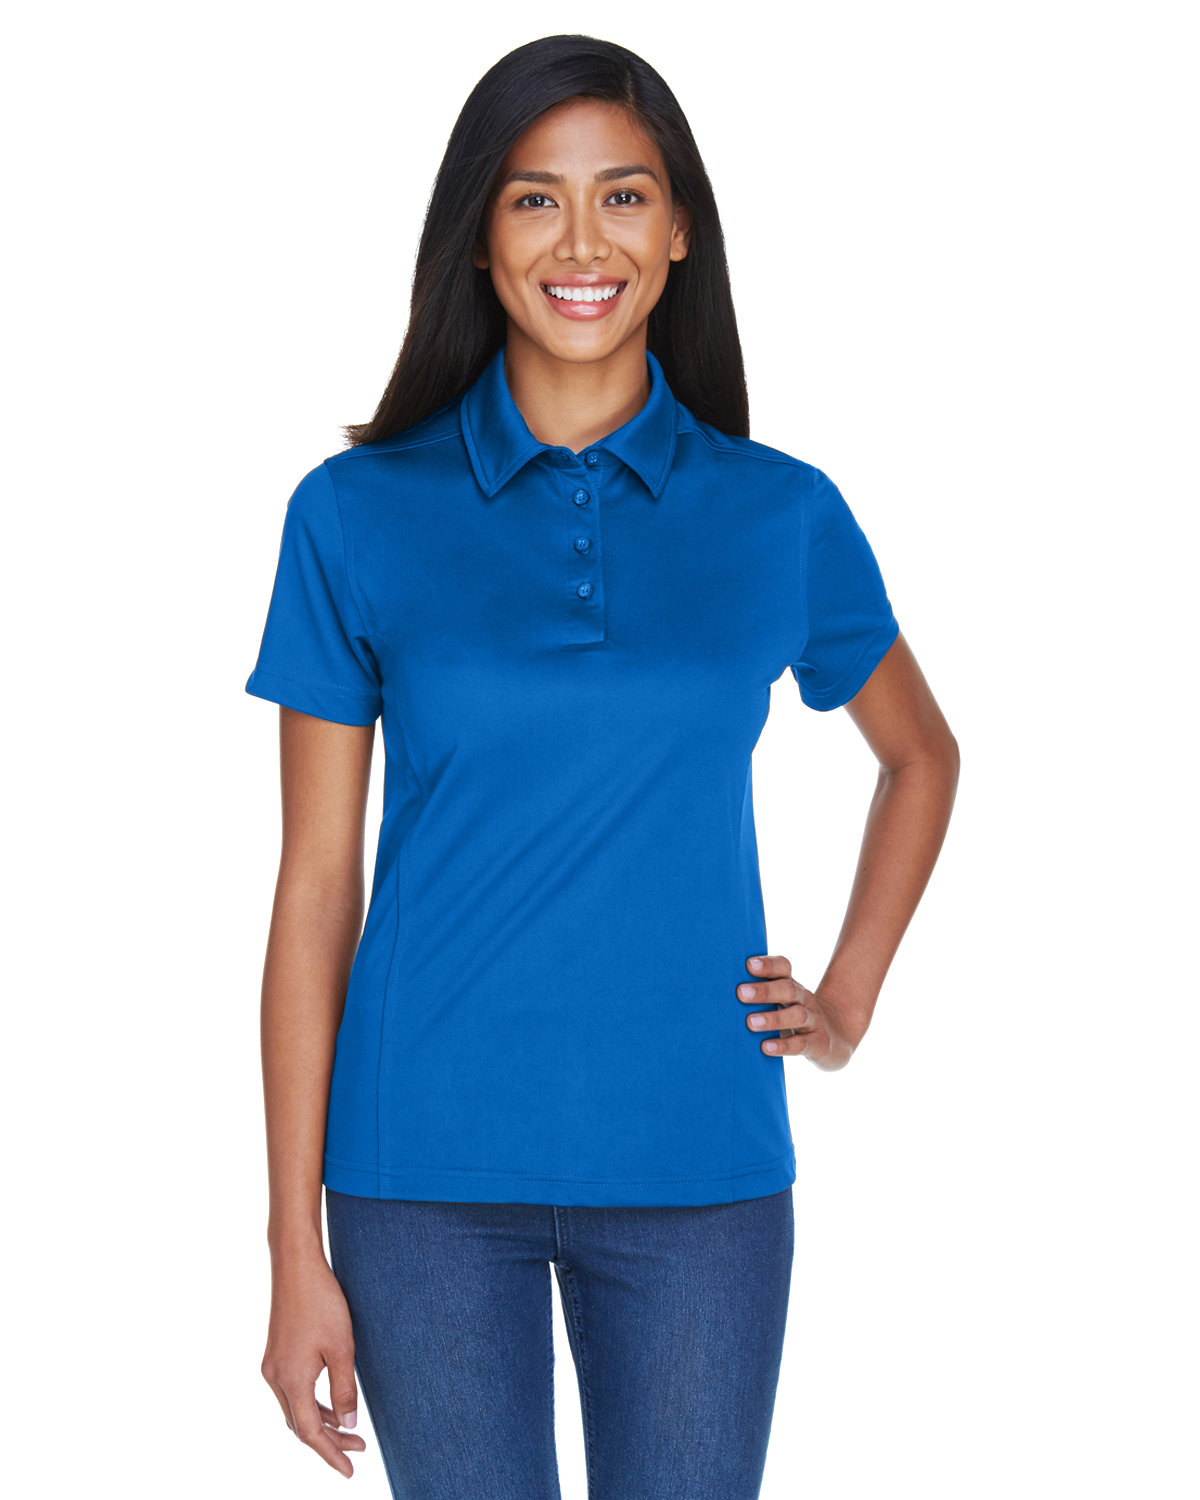 Extreme Ladies' Eperformance™ Shift Snag Protection Plus Polo TRUE ROYAL 